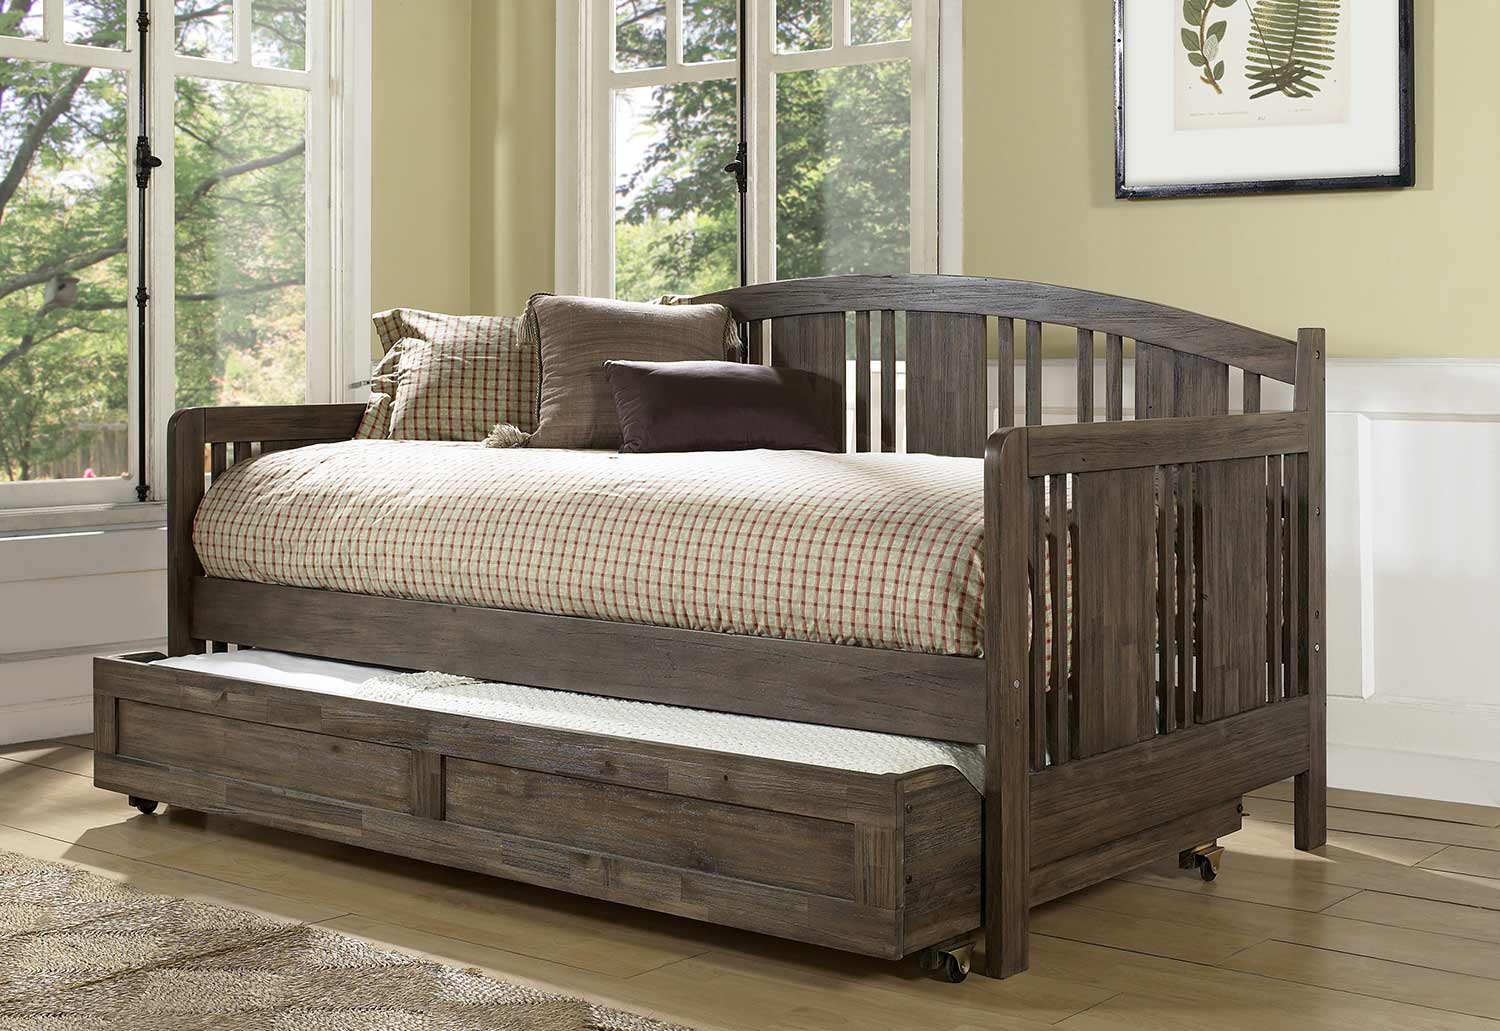 Hillsdale Dana Daybed with Trundle - Brushed Acacia